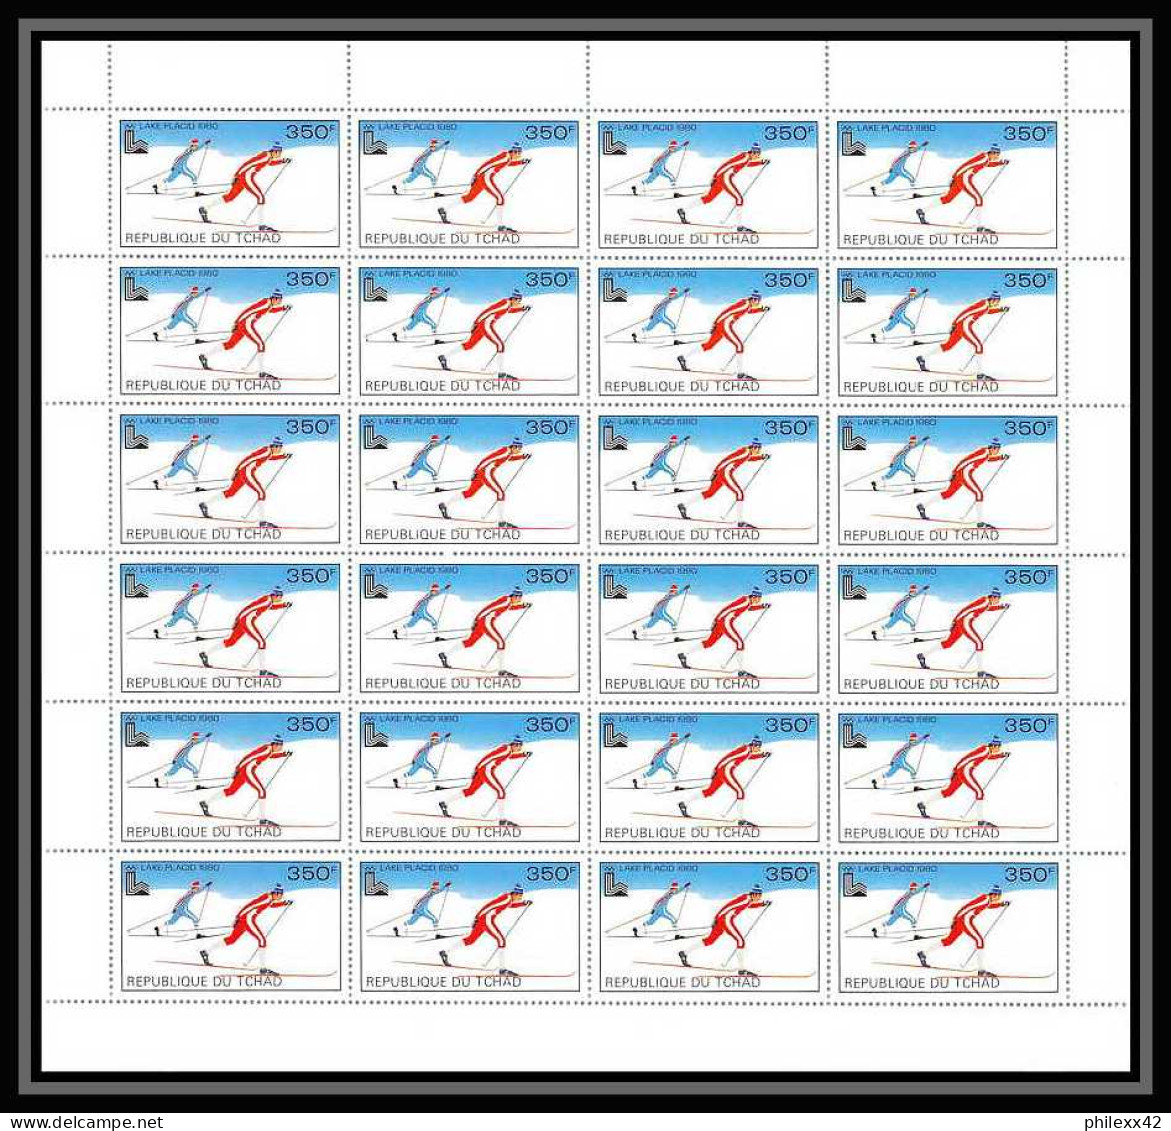 314 Tchad Yvert ** MNH N° 375 Jeux Olympiques Olympic Games Lake Placid Feuilles (sheets) Cross-country Ski Cote 96 Eur - Hiver 1980: Lake Placid